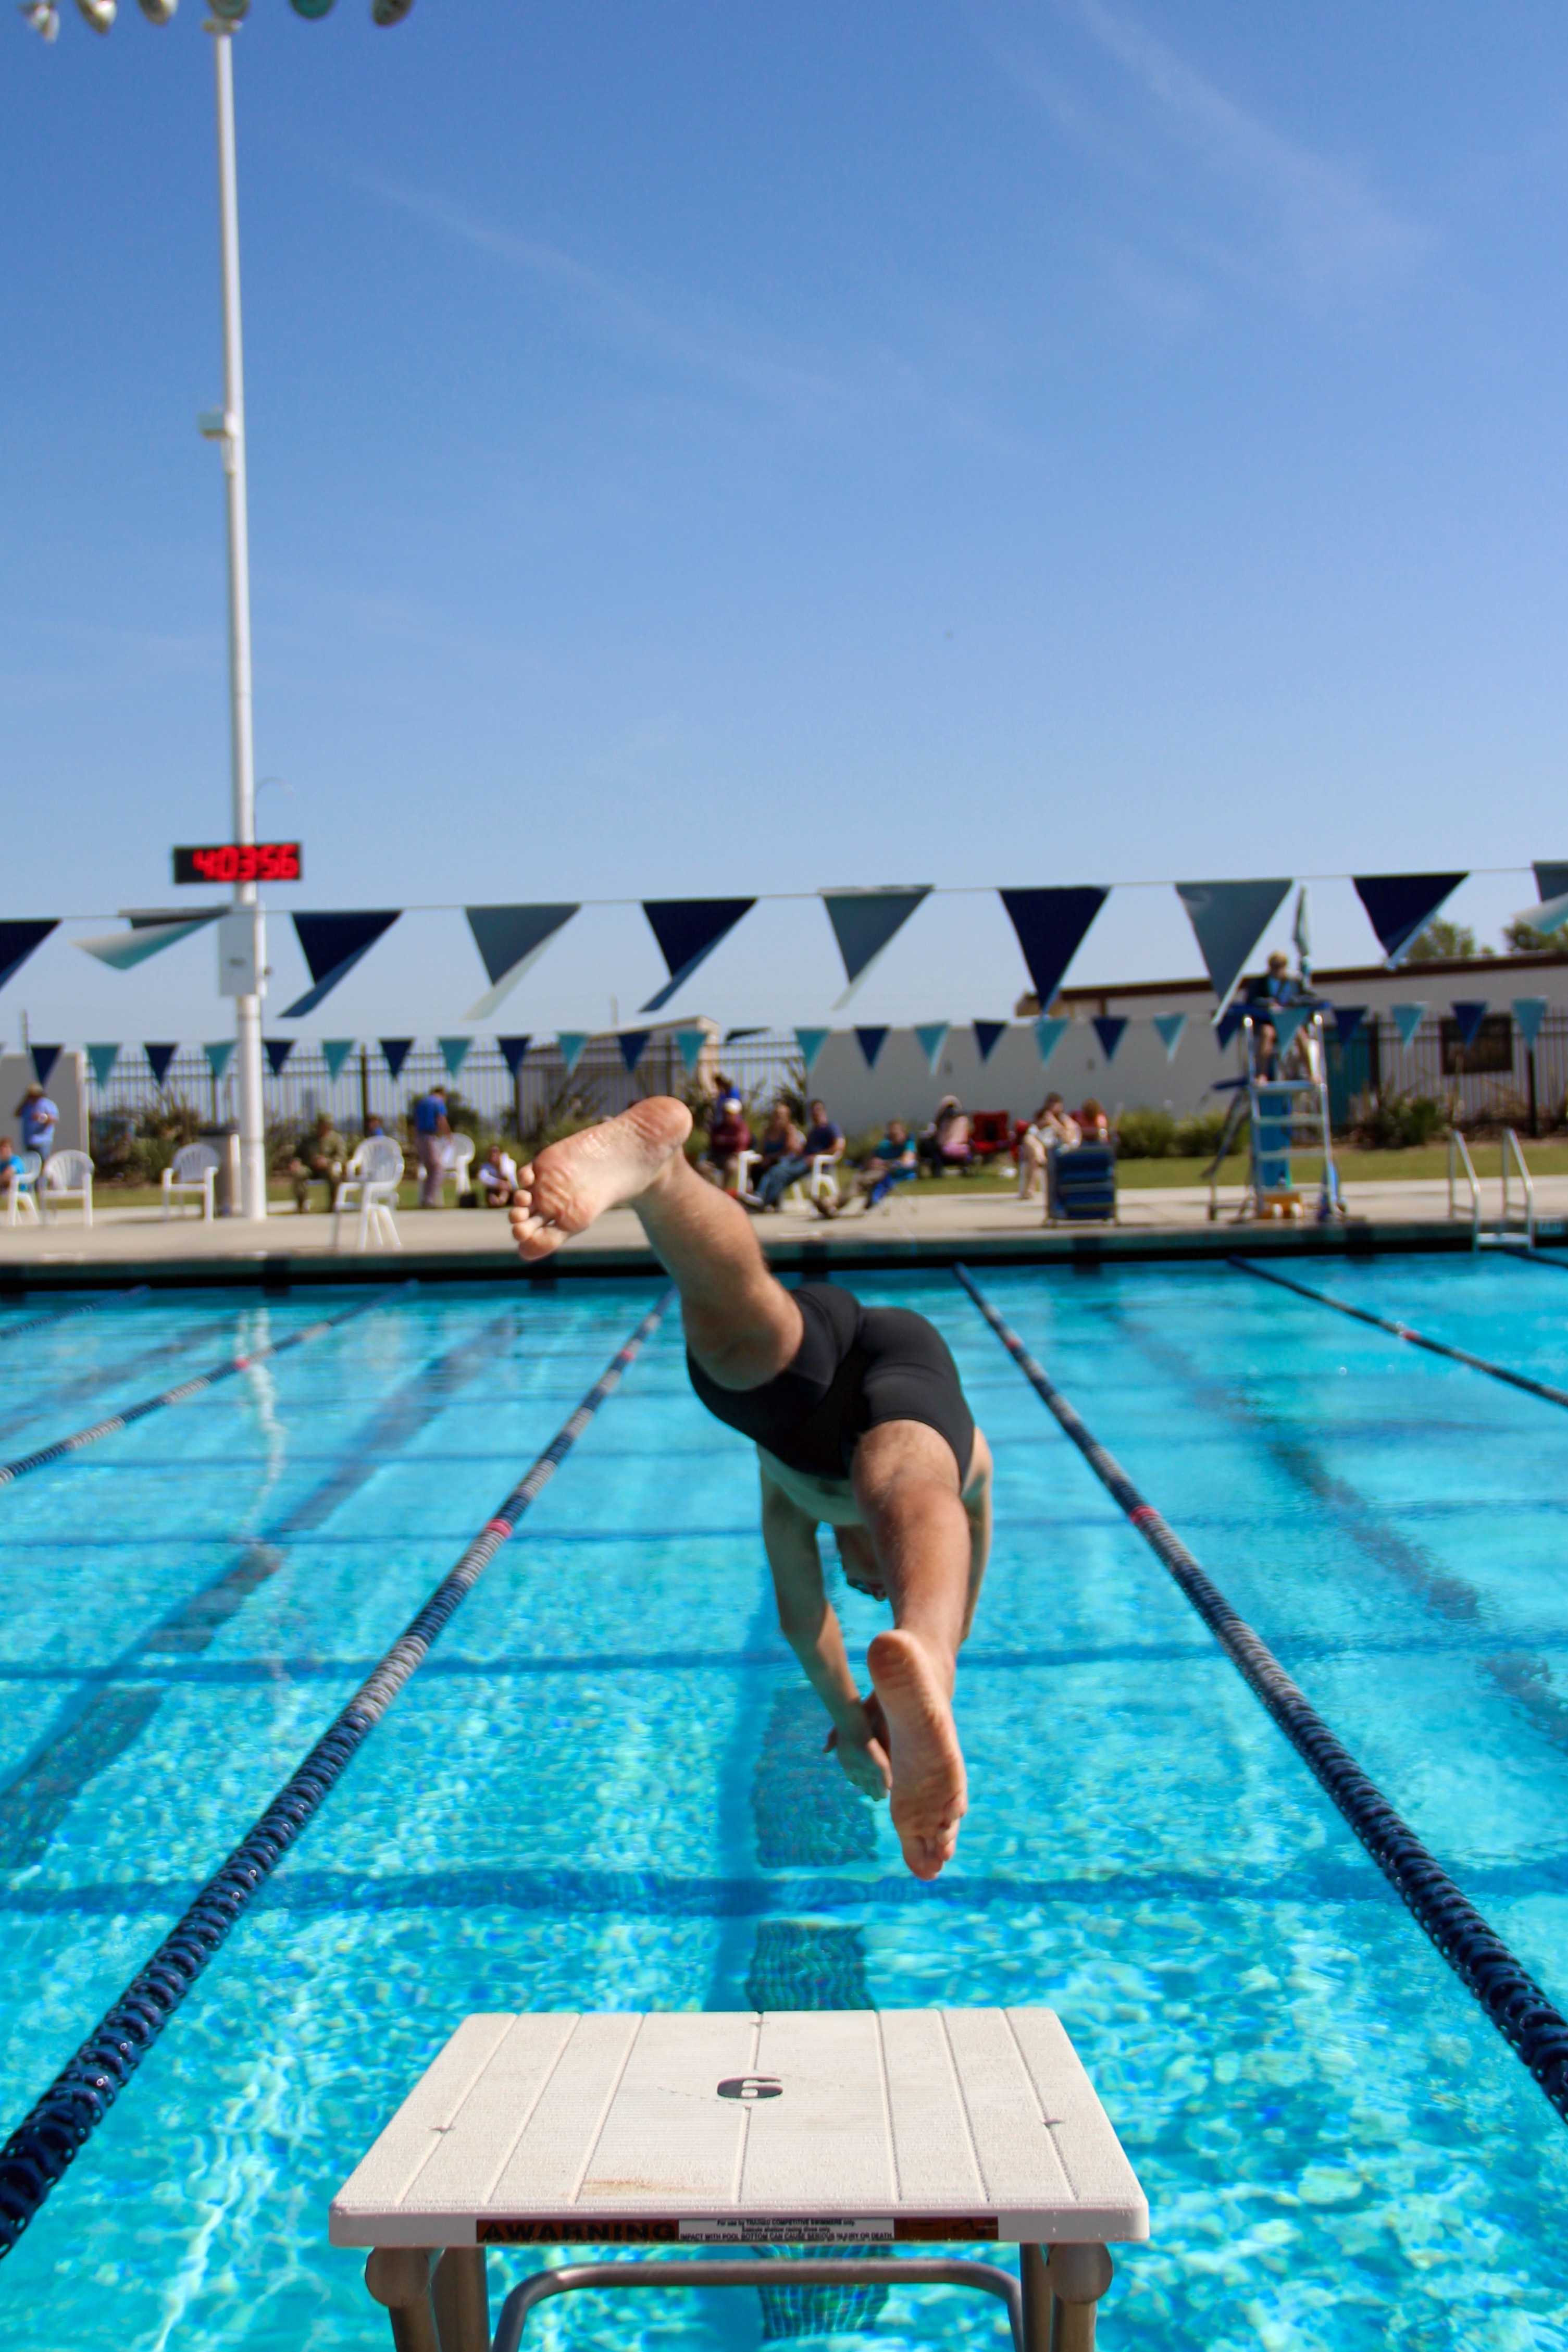 A swimmer jumps into the pool, ready to compete. Credit: Kazu Koba/The Foothill Dragon Press